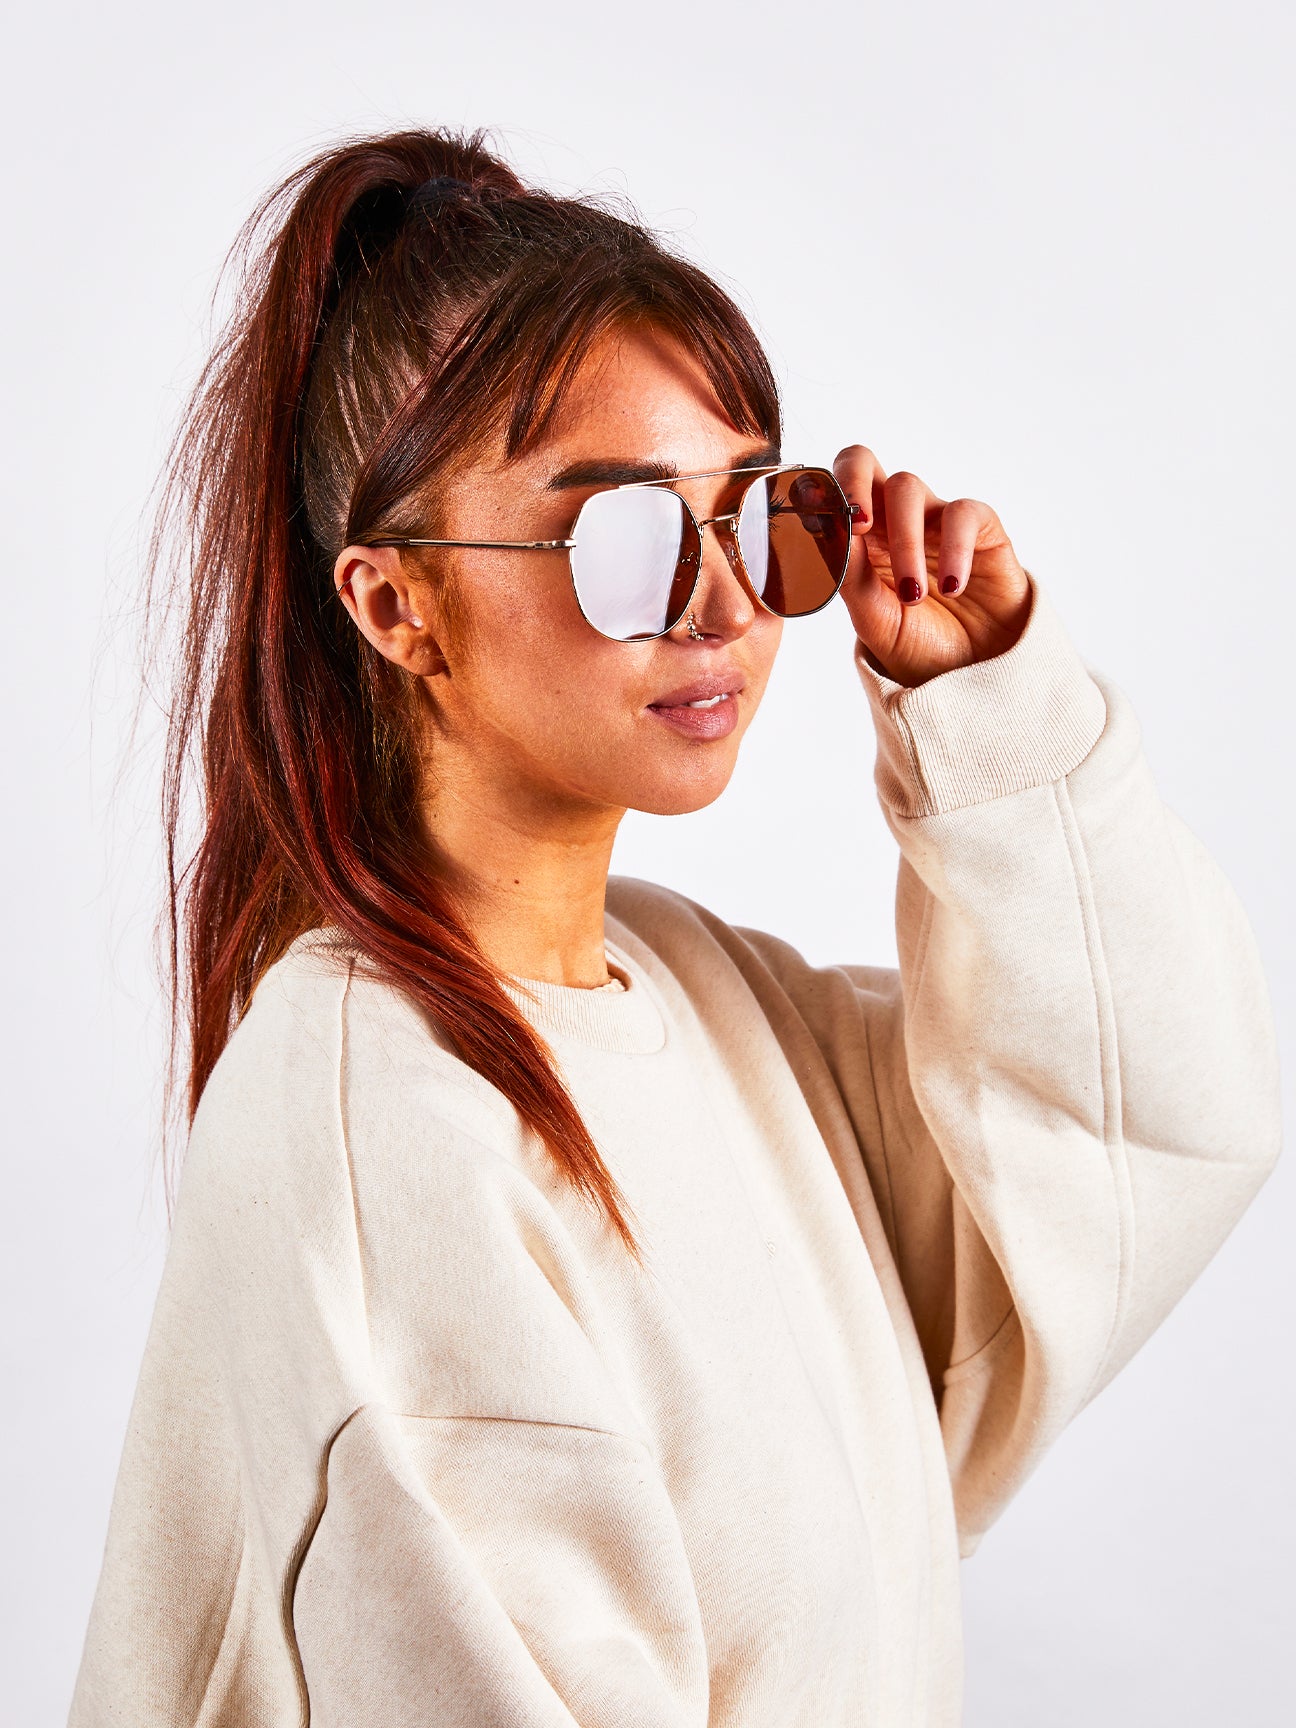 Oversized Aviator Style Sunglasses with Brown Lenses